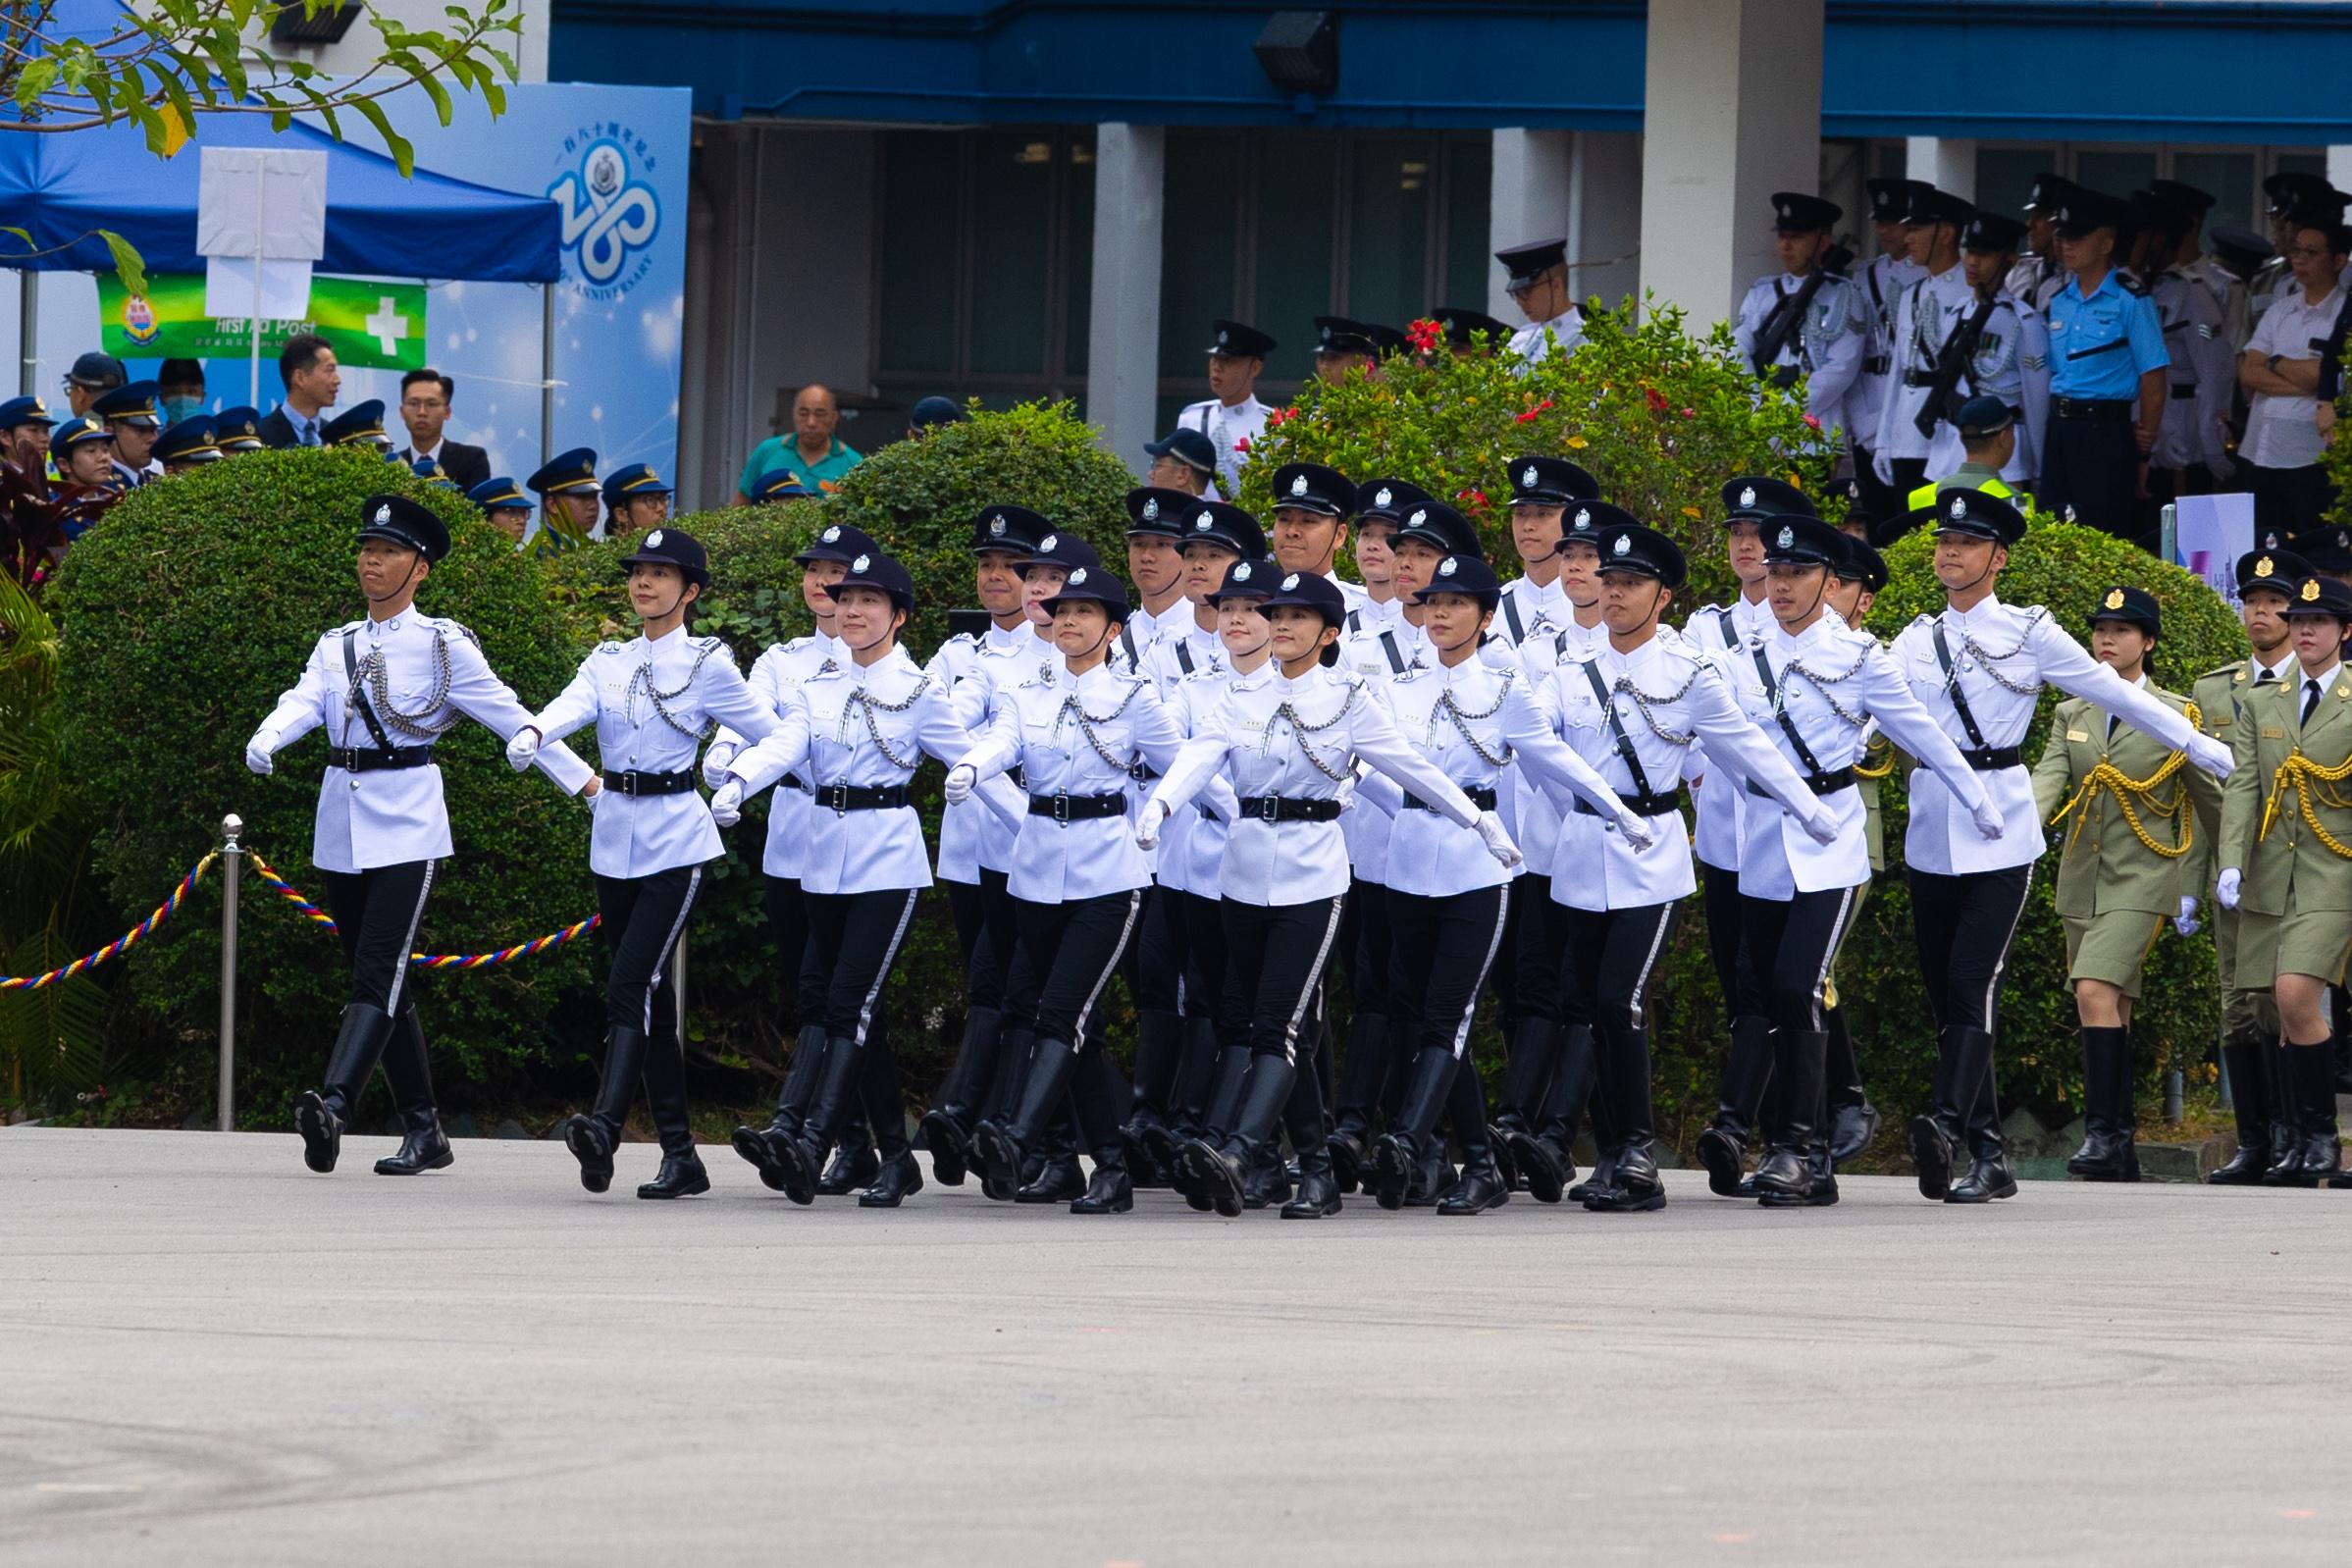 The Security Bureau and its disciplined services jointly held a National Security Education Day flag-raising ceremony at the Hong Kong Police College today (April 15). Photo shows a march-in by the disciplined services ceremonial guard.